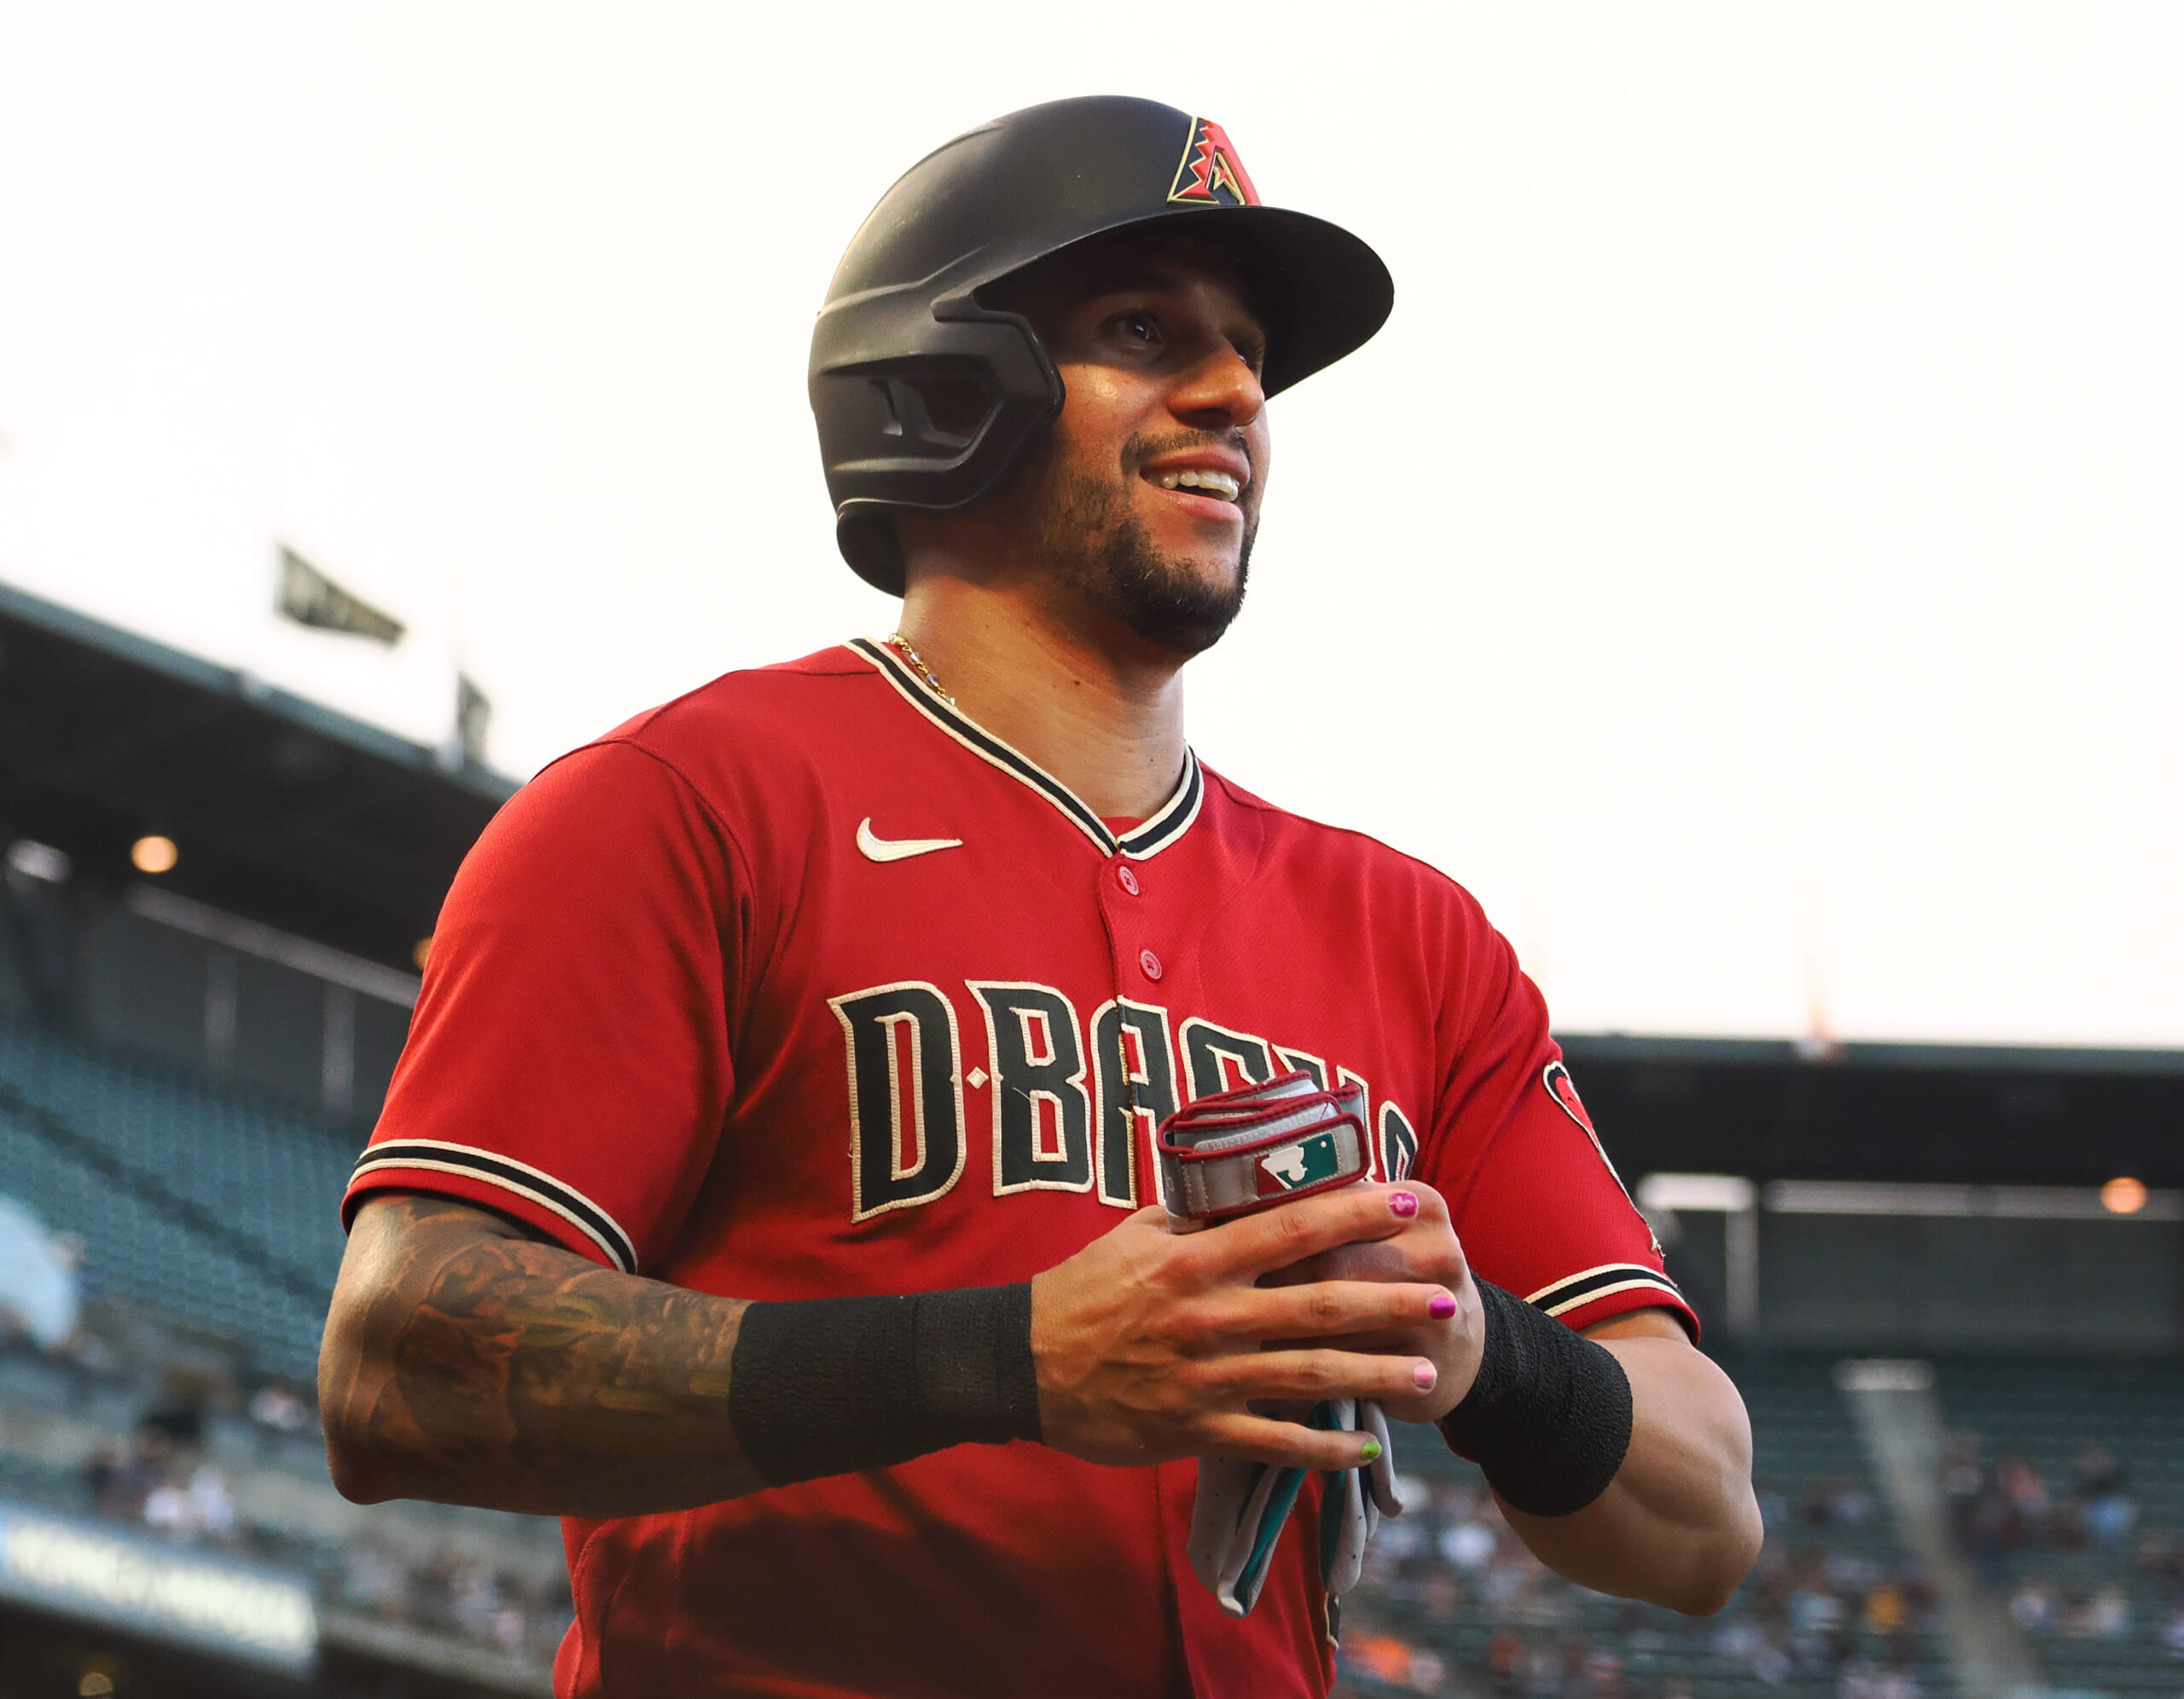 David Peralta, D-backs agree to contract extension